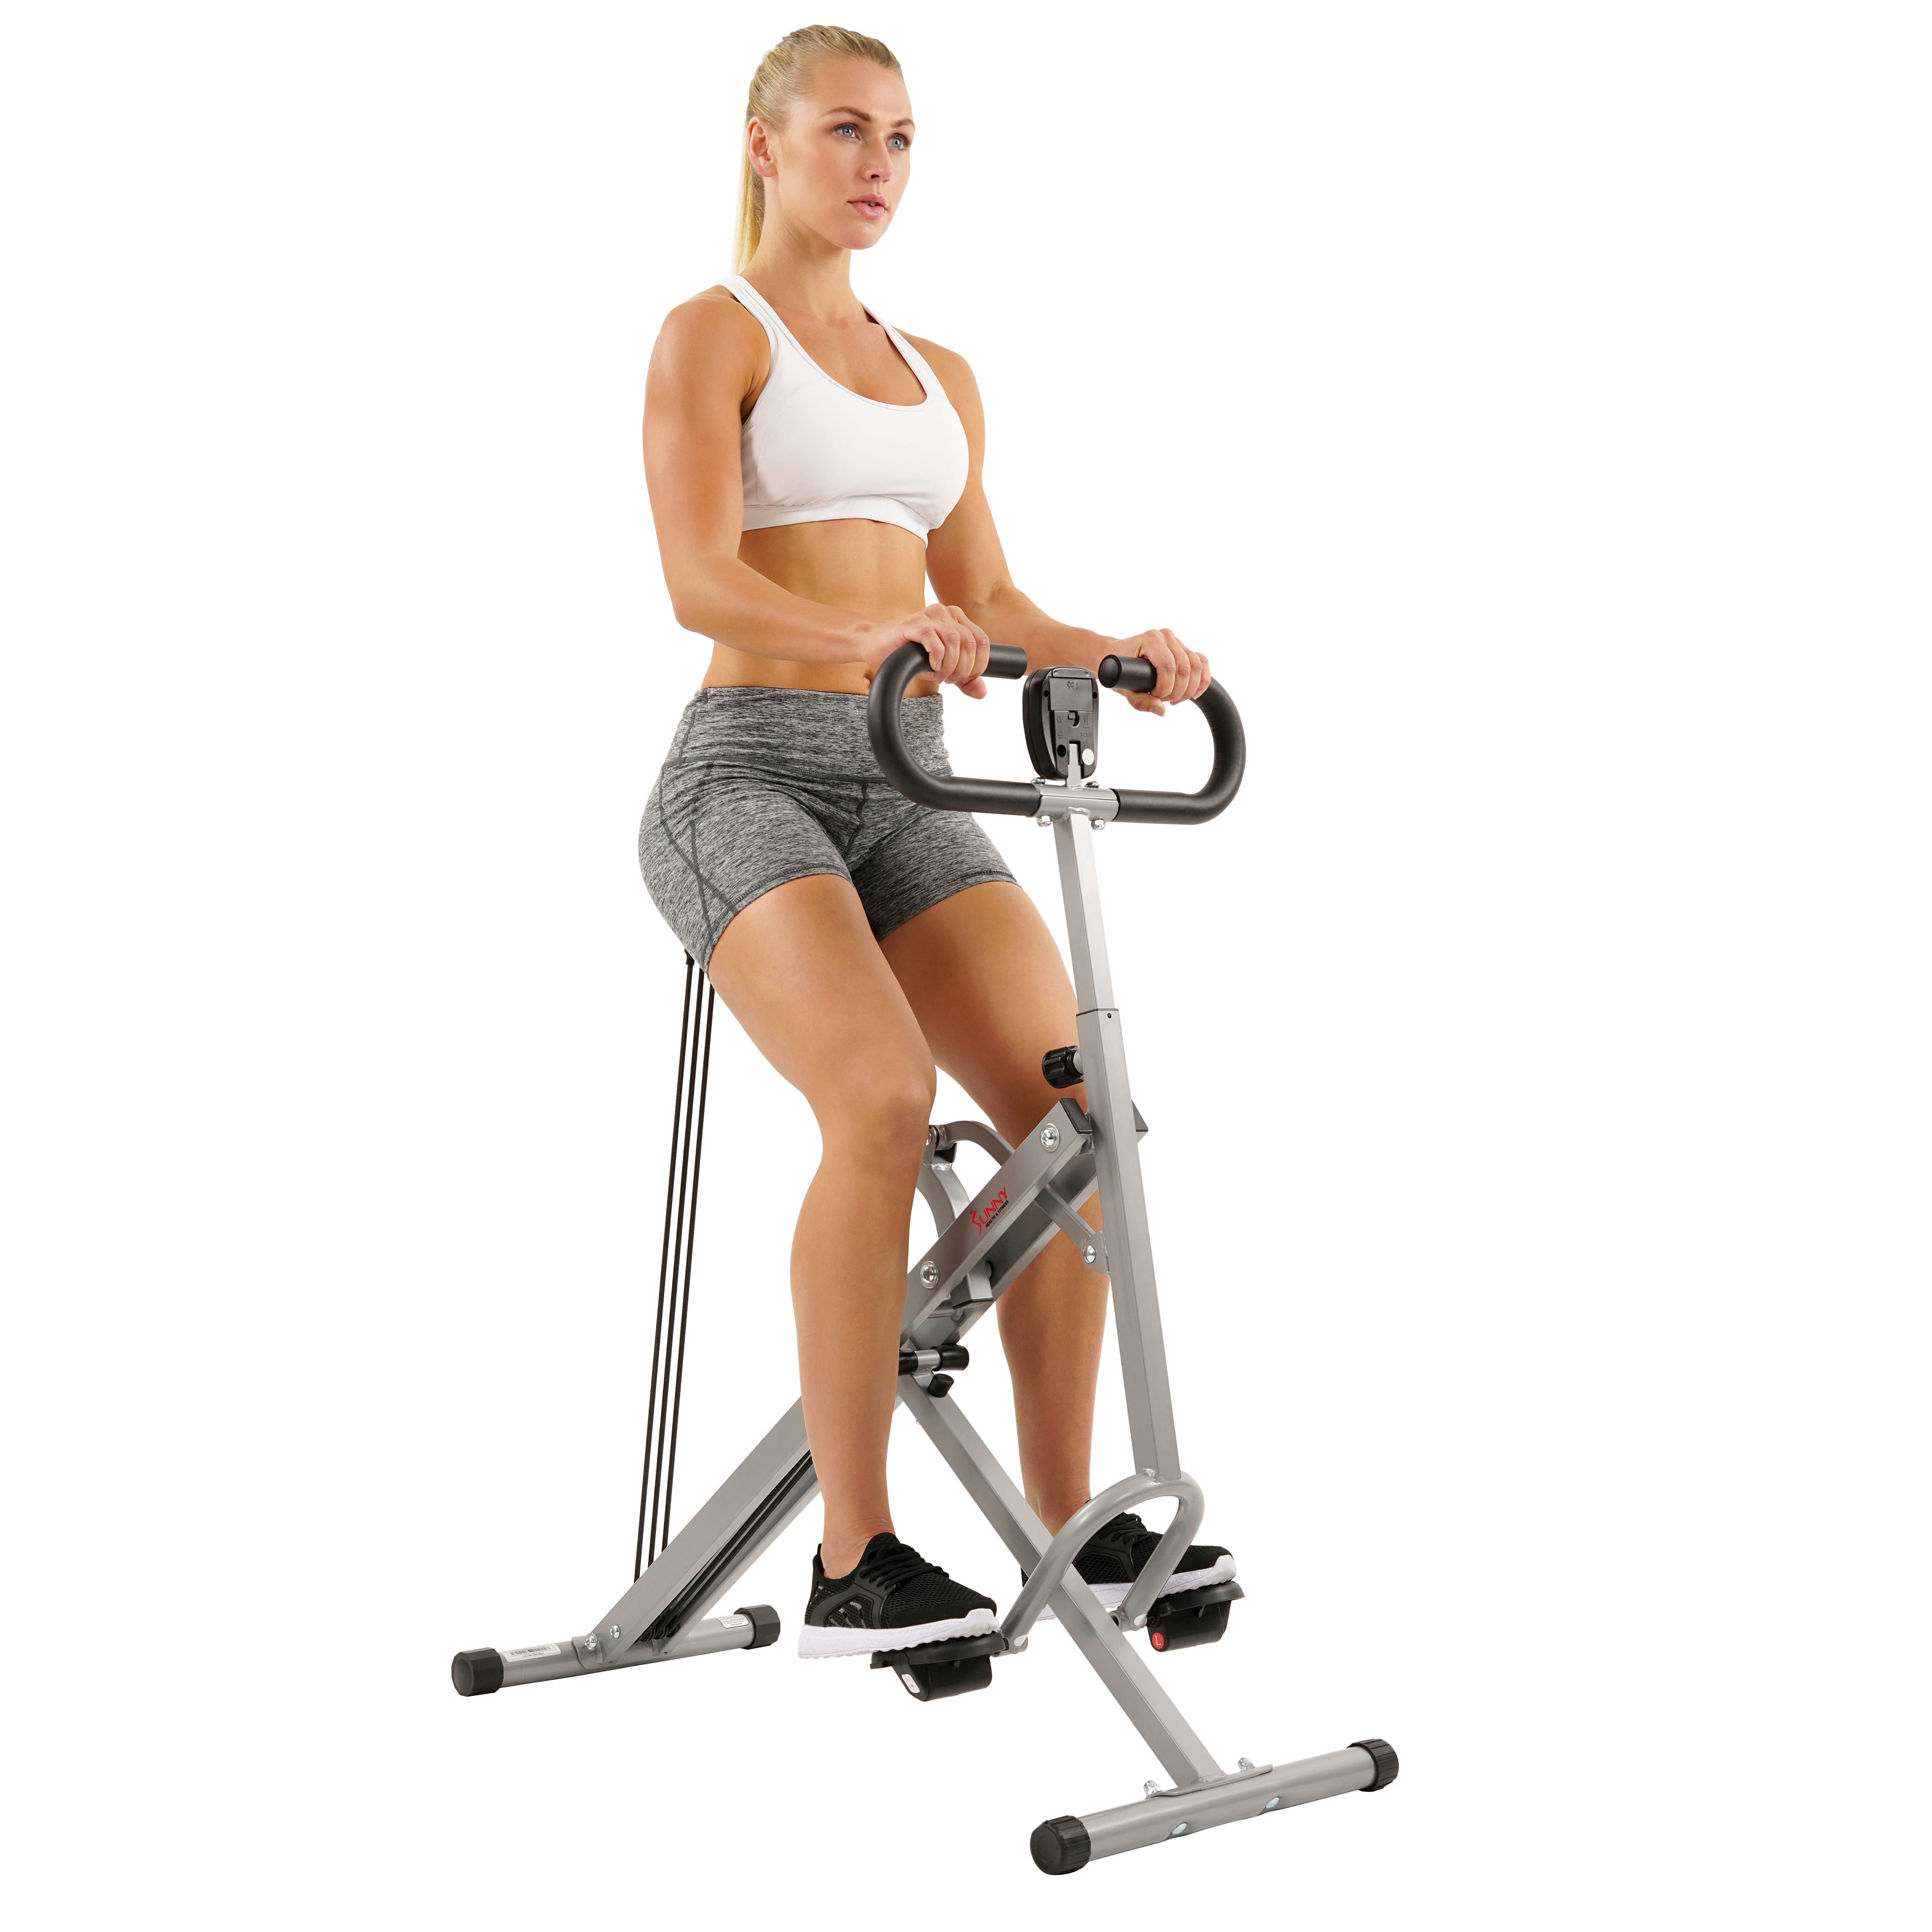 Sunny Health & Fitness Squat Assist Row-N-Ride™ Trainer for Glutes Workout - image 1 of 10